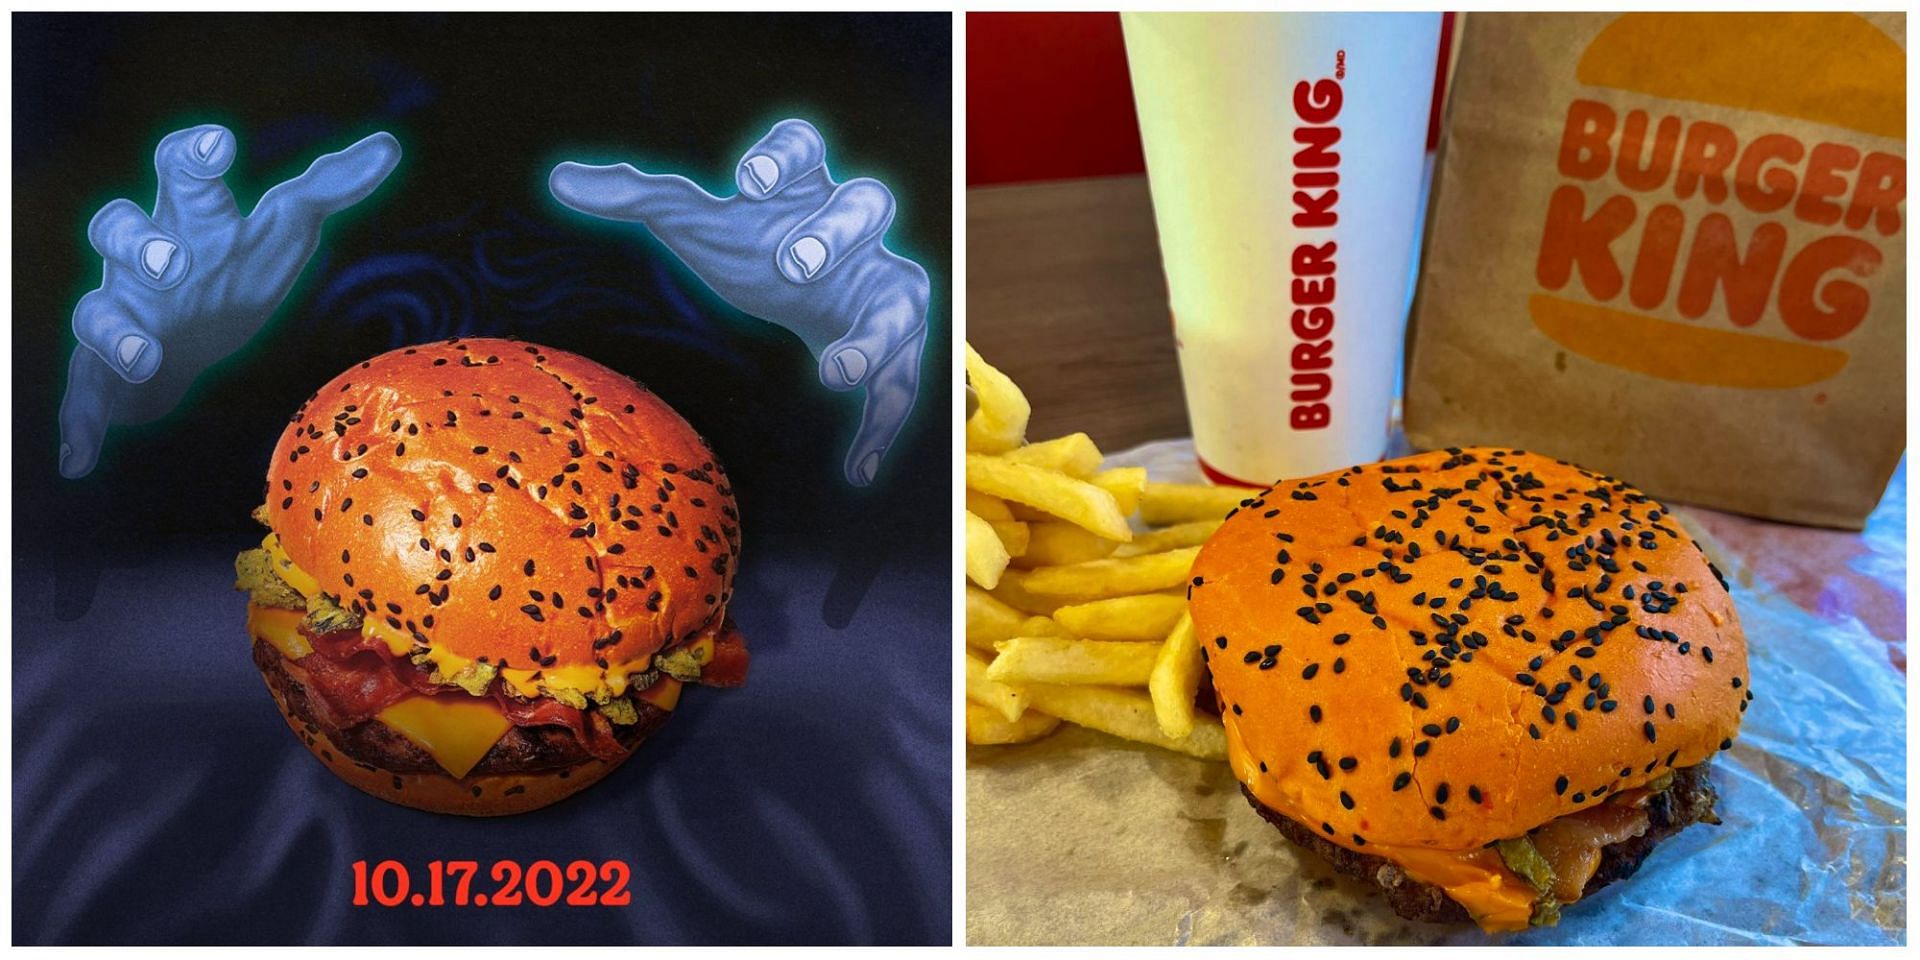 Burger King launches a spicy burger to celebrate Halloween. Details explored. (Image via Burger King/ Twitter)